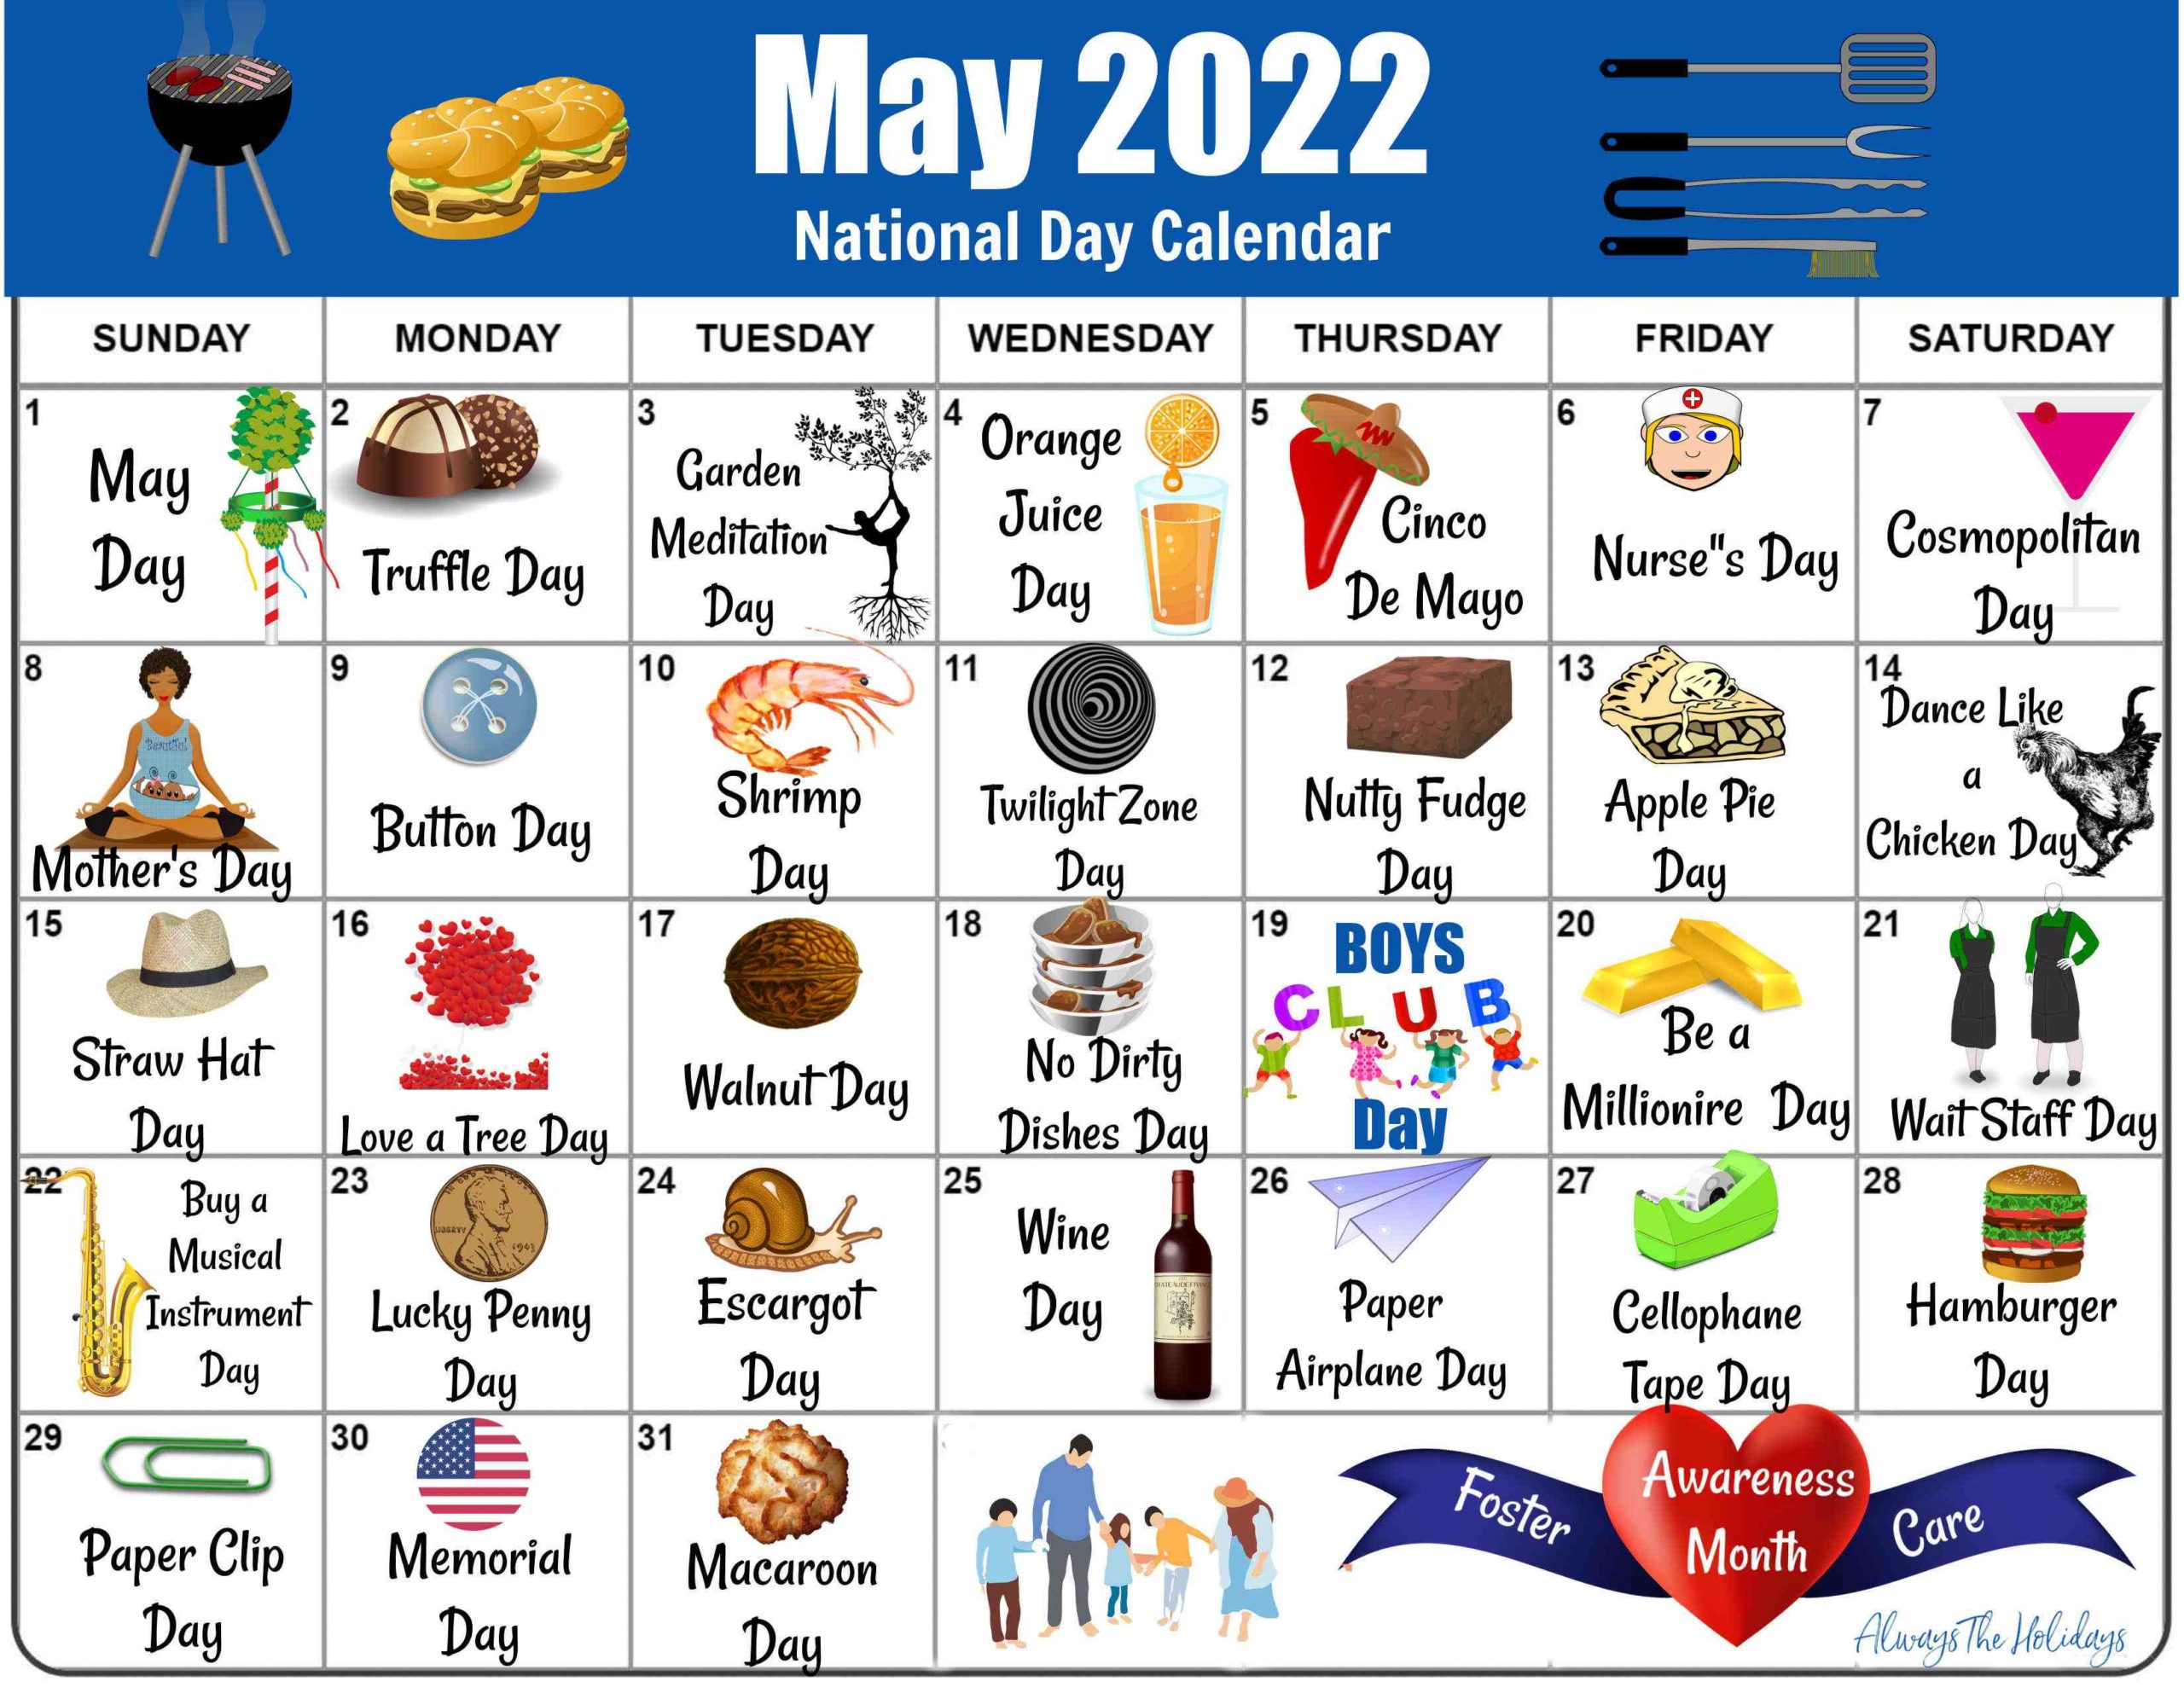 Calendar of National Days in May.